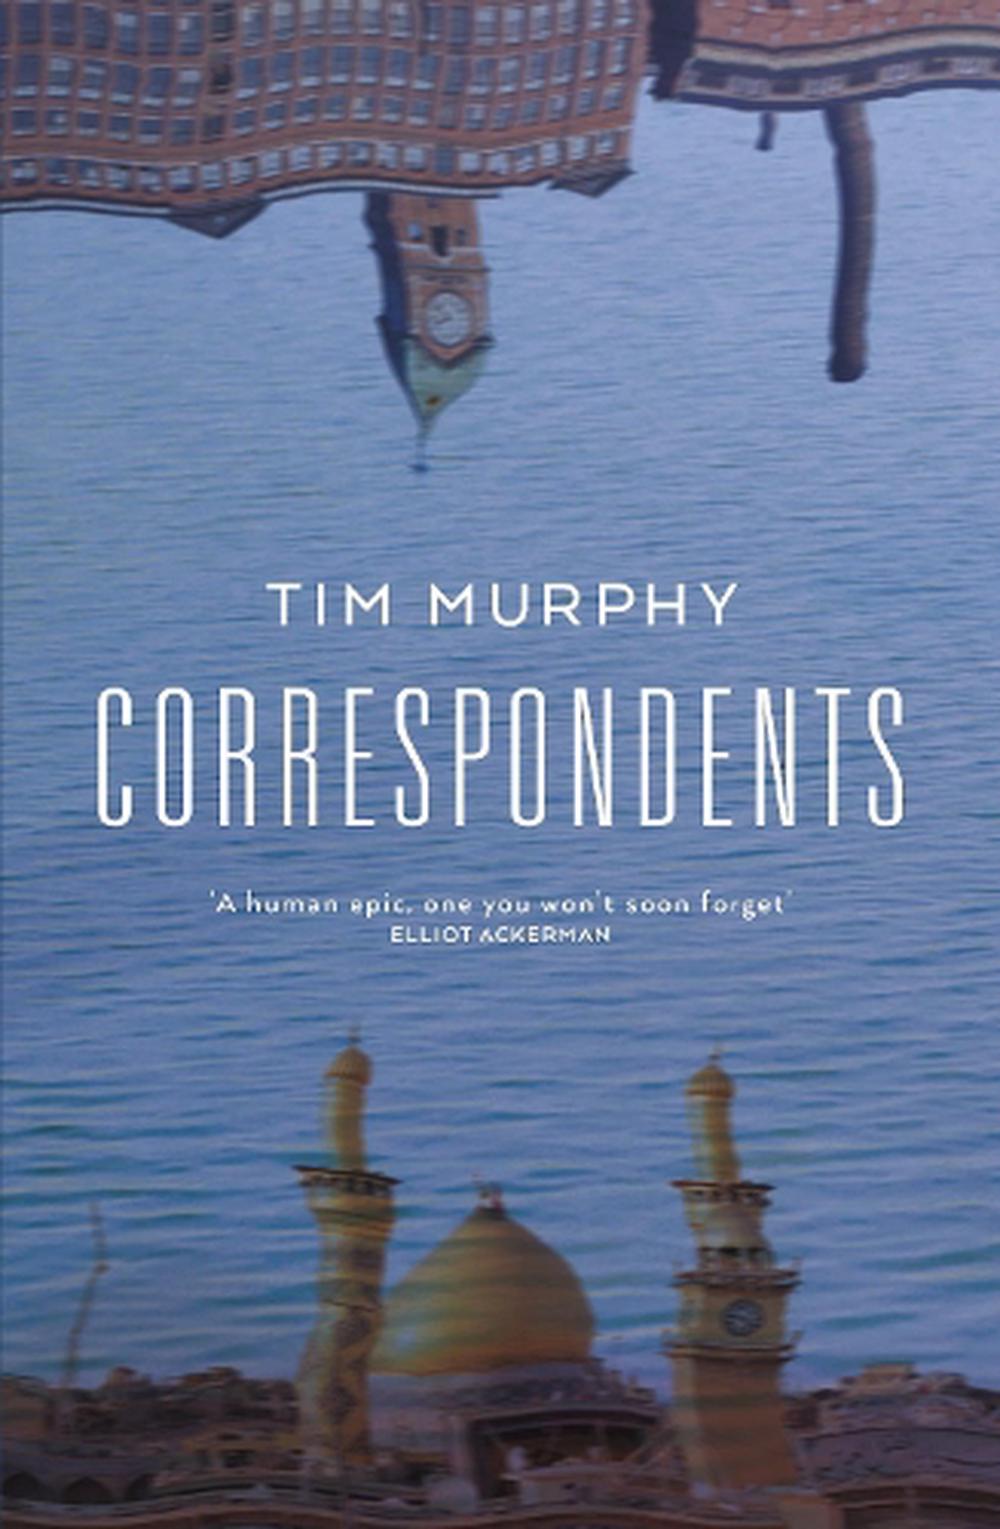 Correspondents by Tim Murphy (English) Paperback Book Free Shipping ...